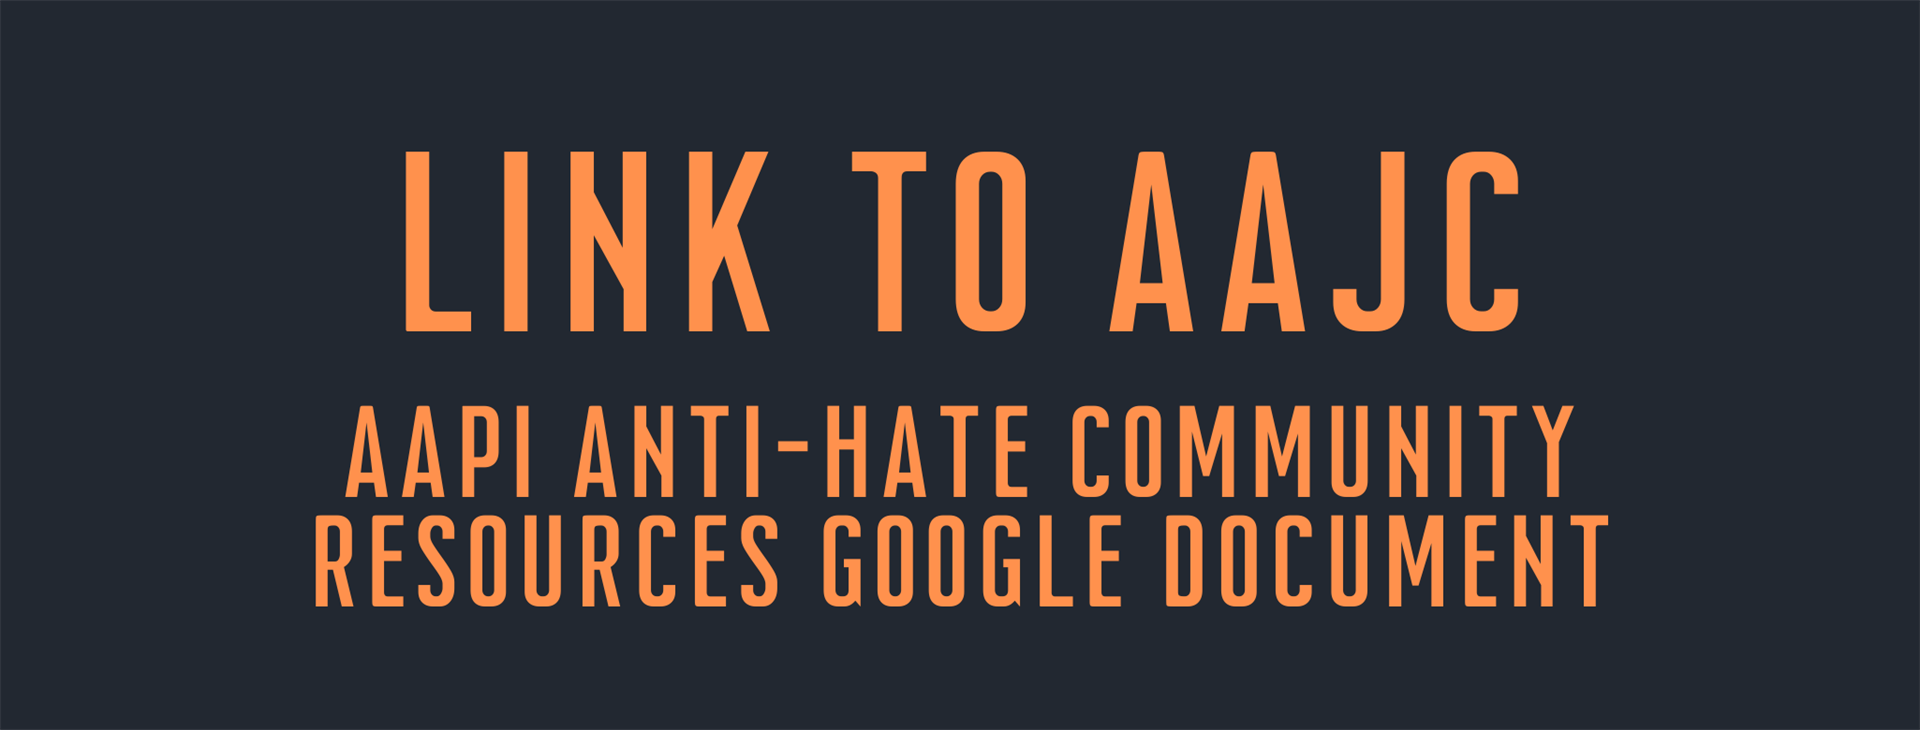 Link to AAJC AAPI Anti-Hate Community Resources Google Document